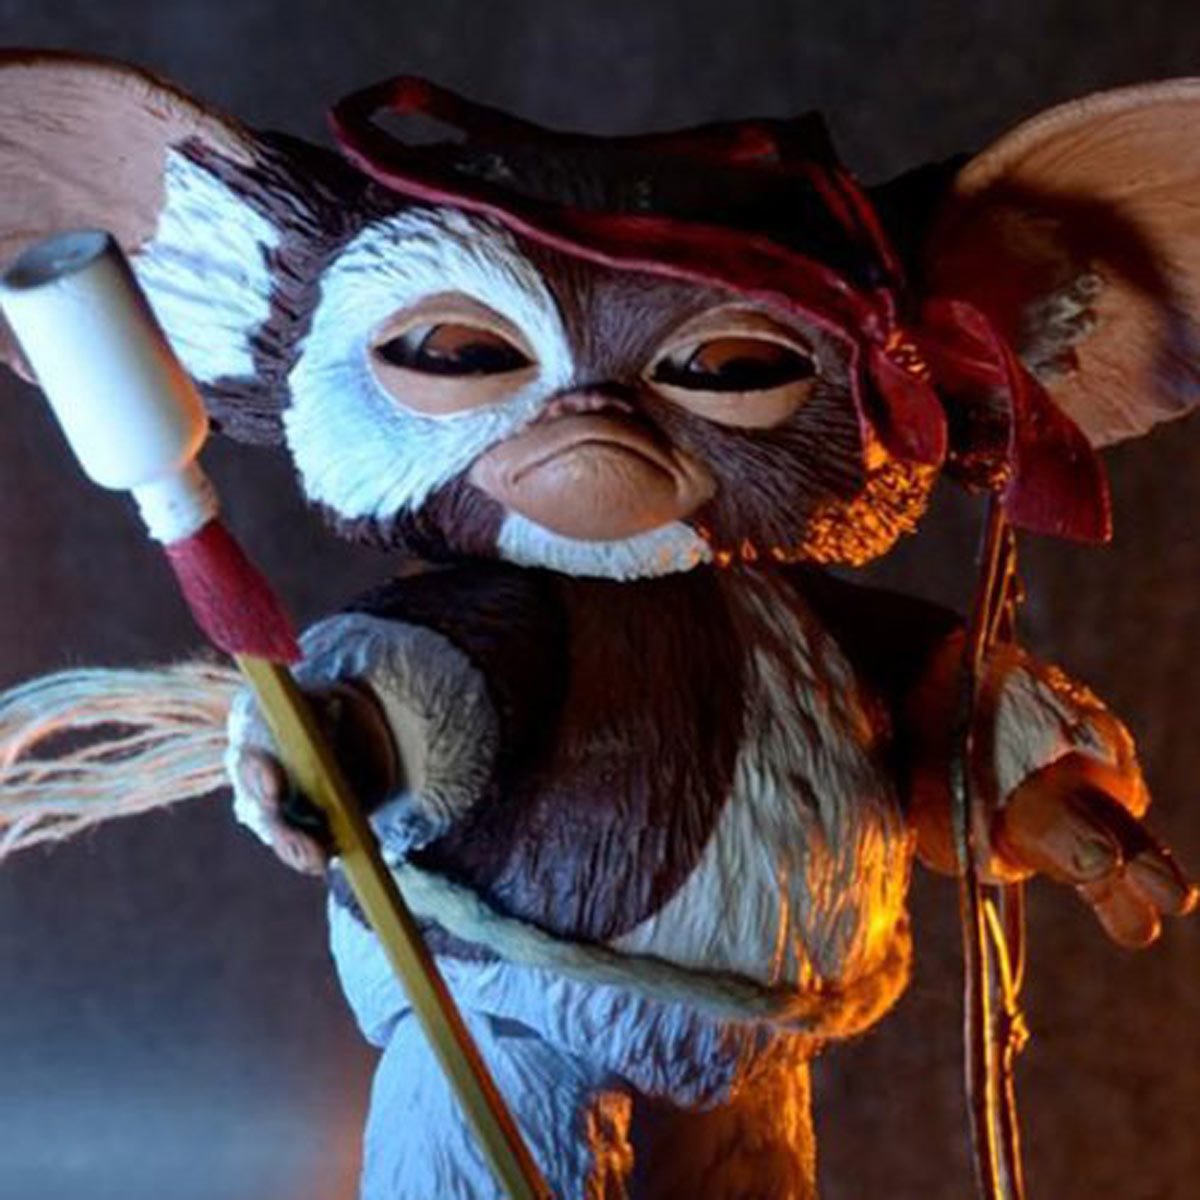 NECA Gremlins Gizmo Ultimate 7" Scale Action Figure Movie Posable Collection